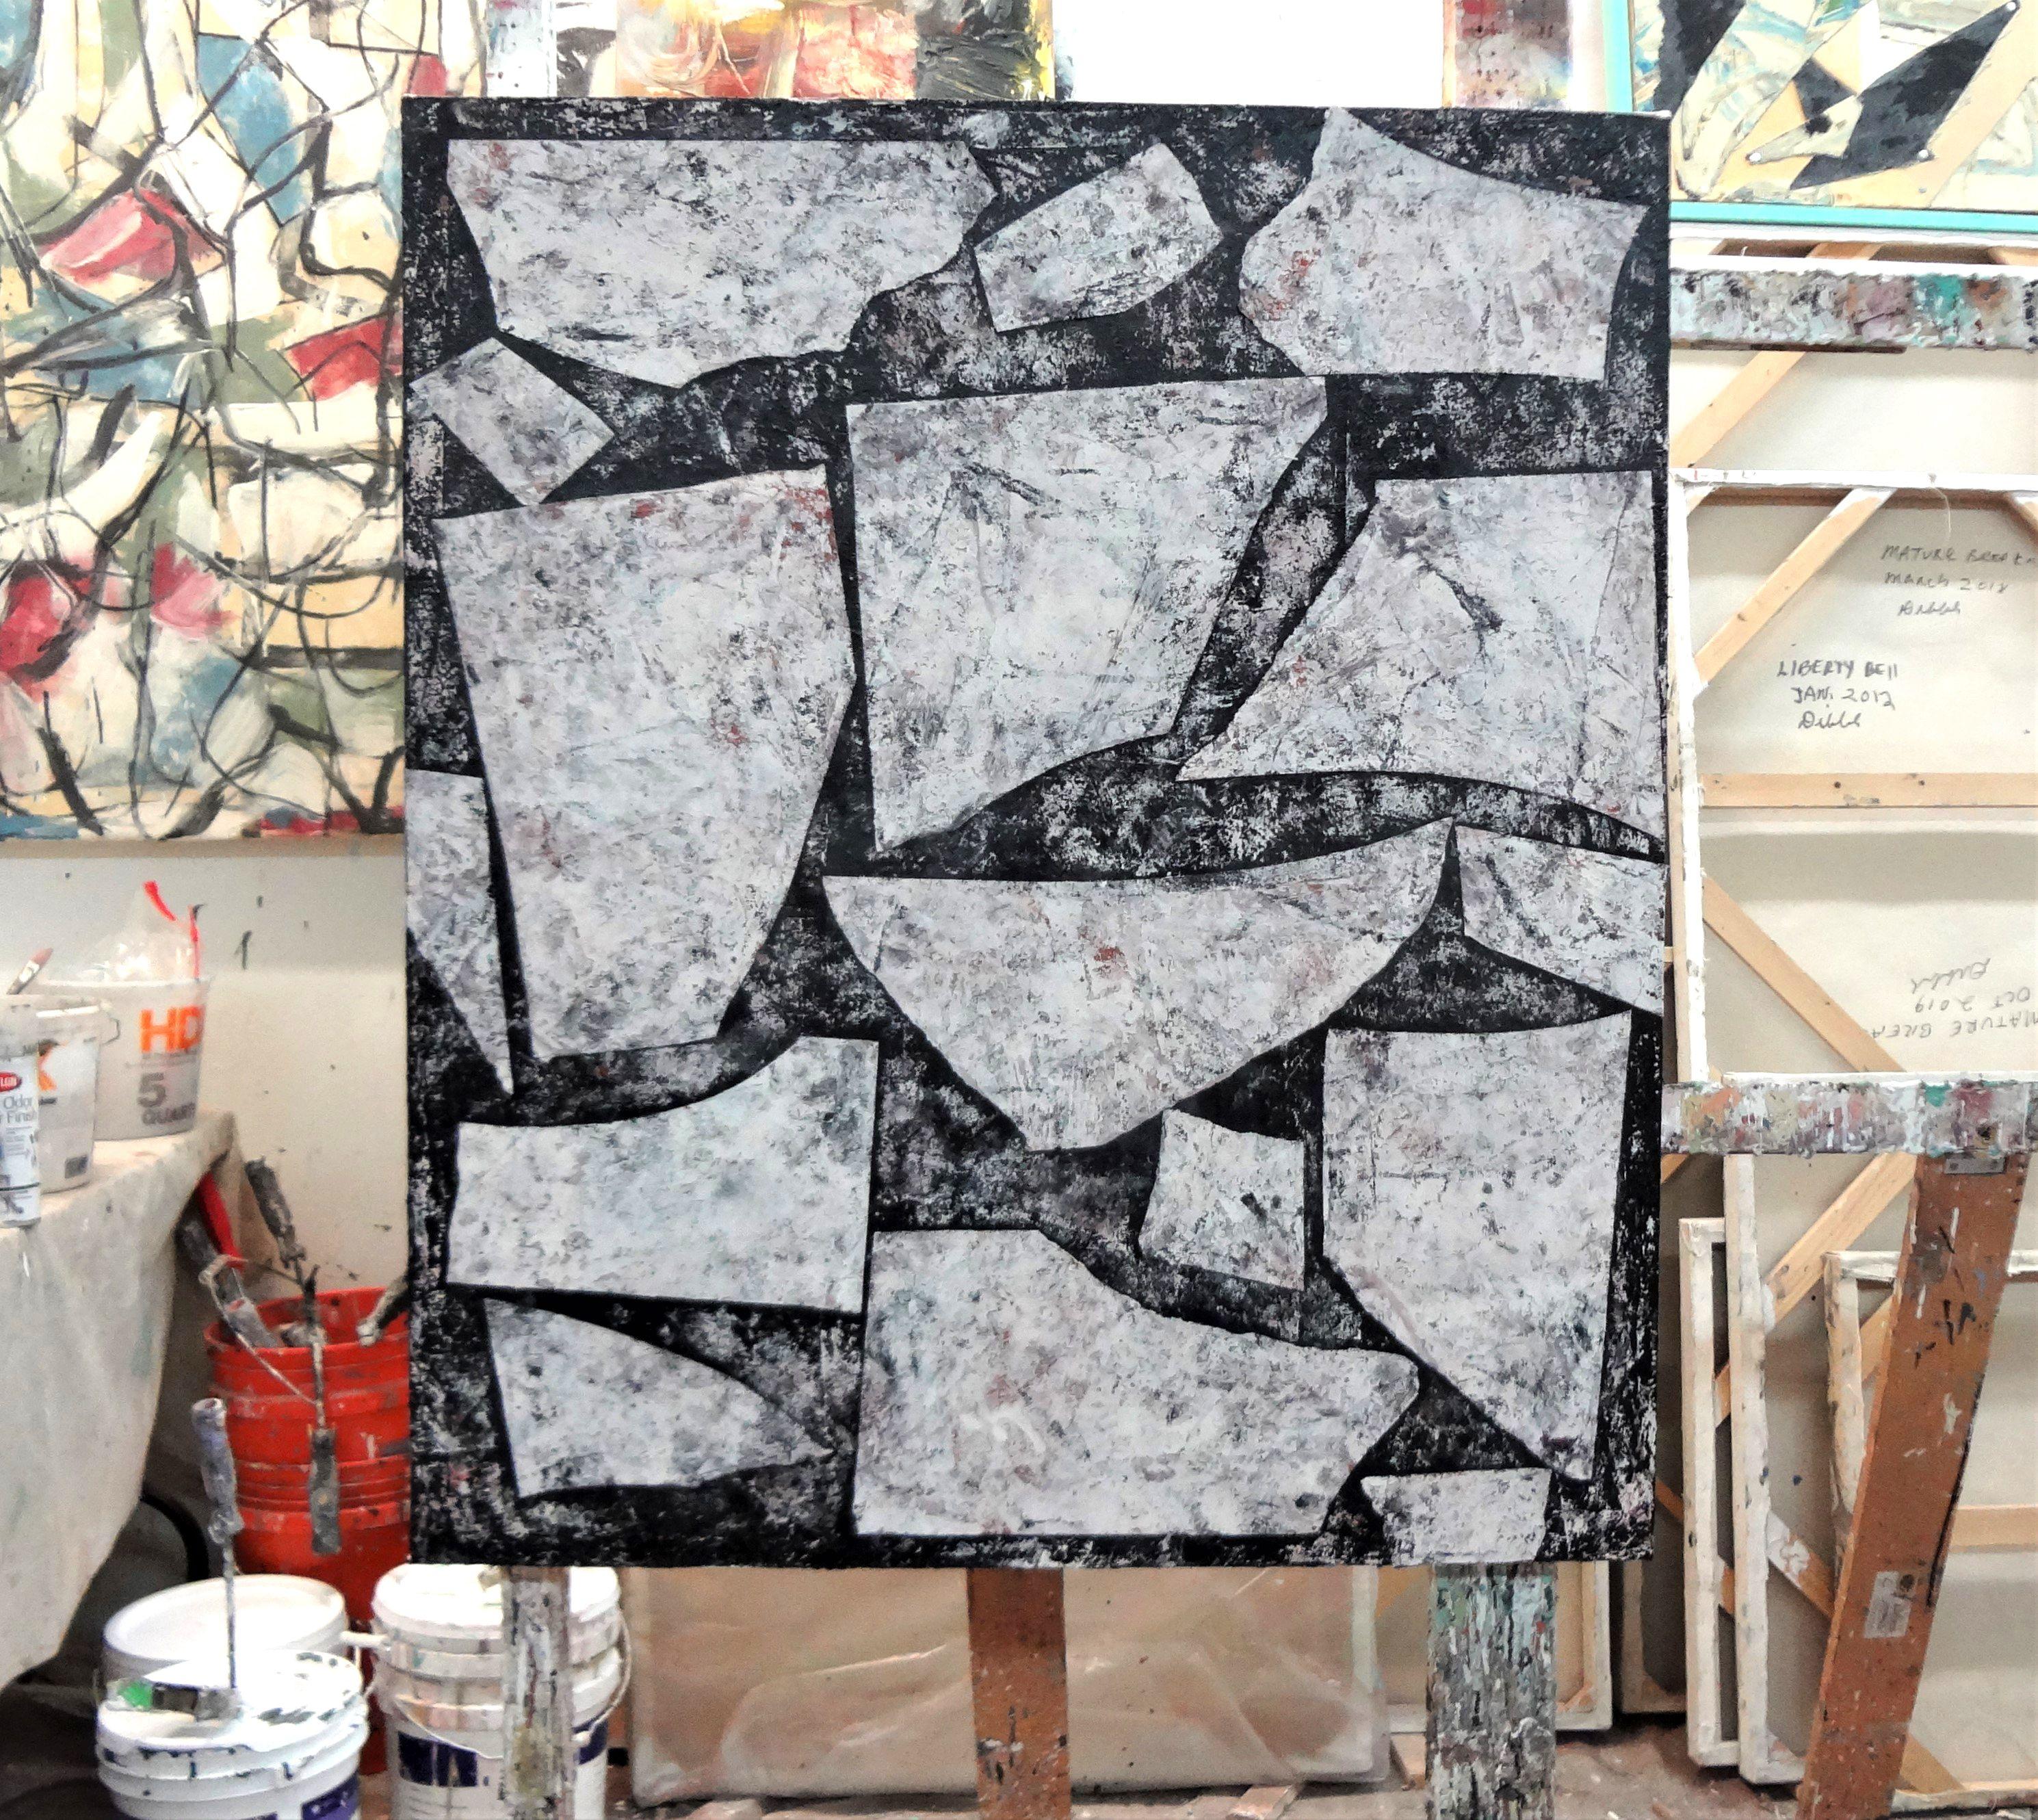 Easel Freak, Mixed Media on Canvas - Abstract Expressionist Mixed Media Art by Matthew Dibble